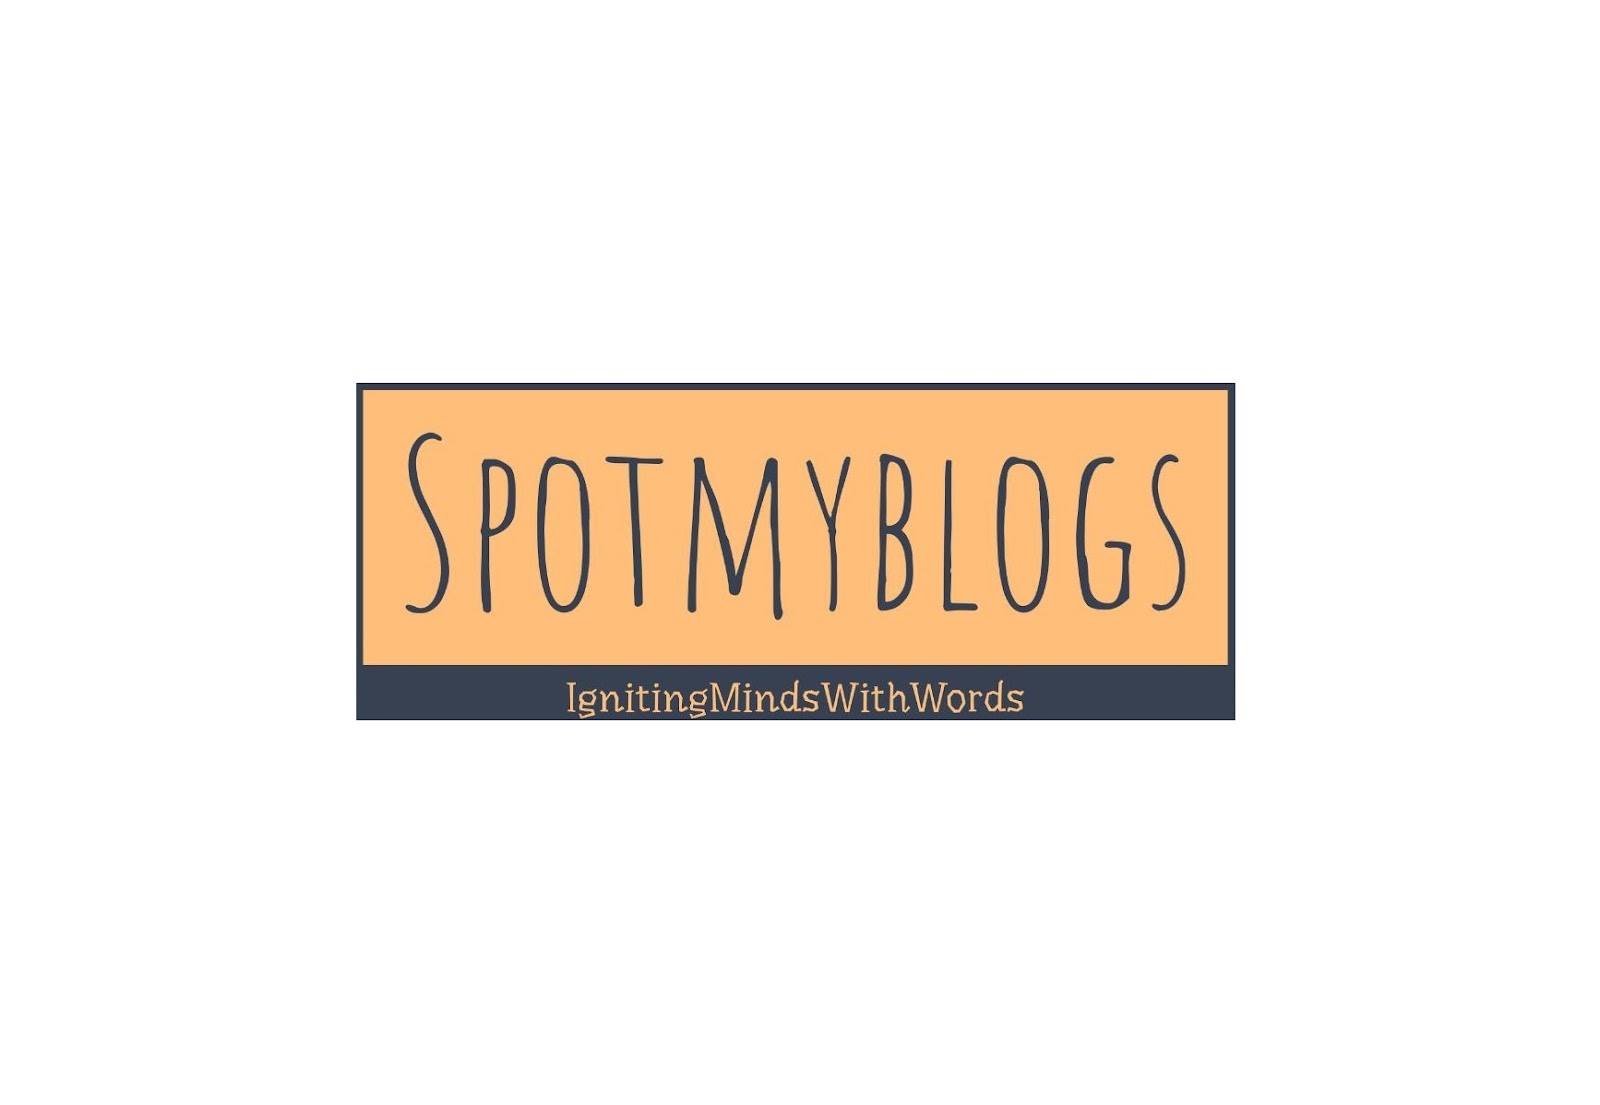 SpotMyBlogs - Igniting Minds With Words